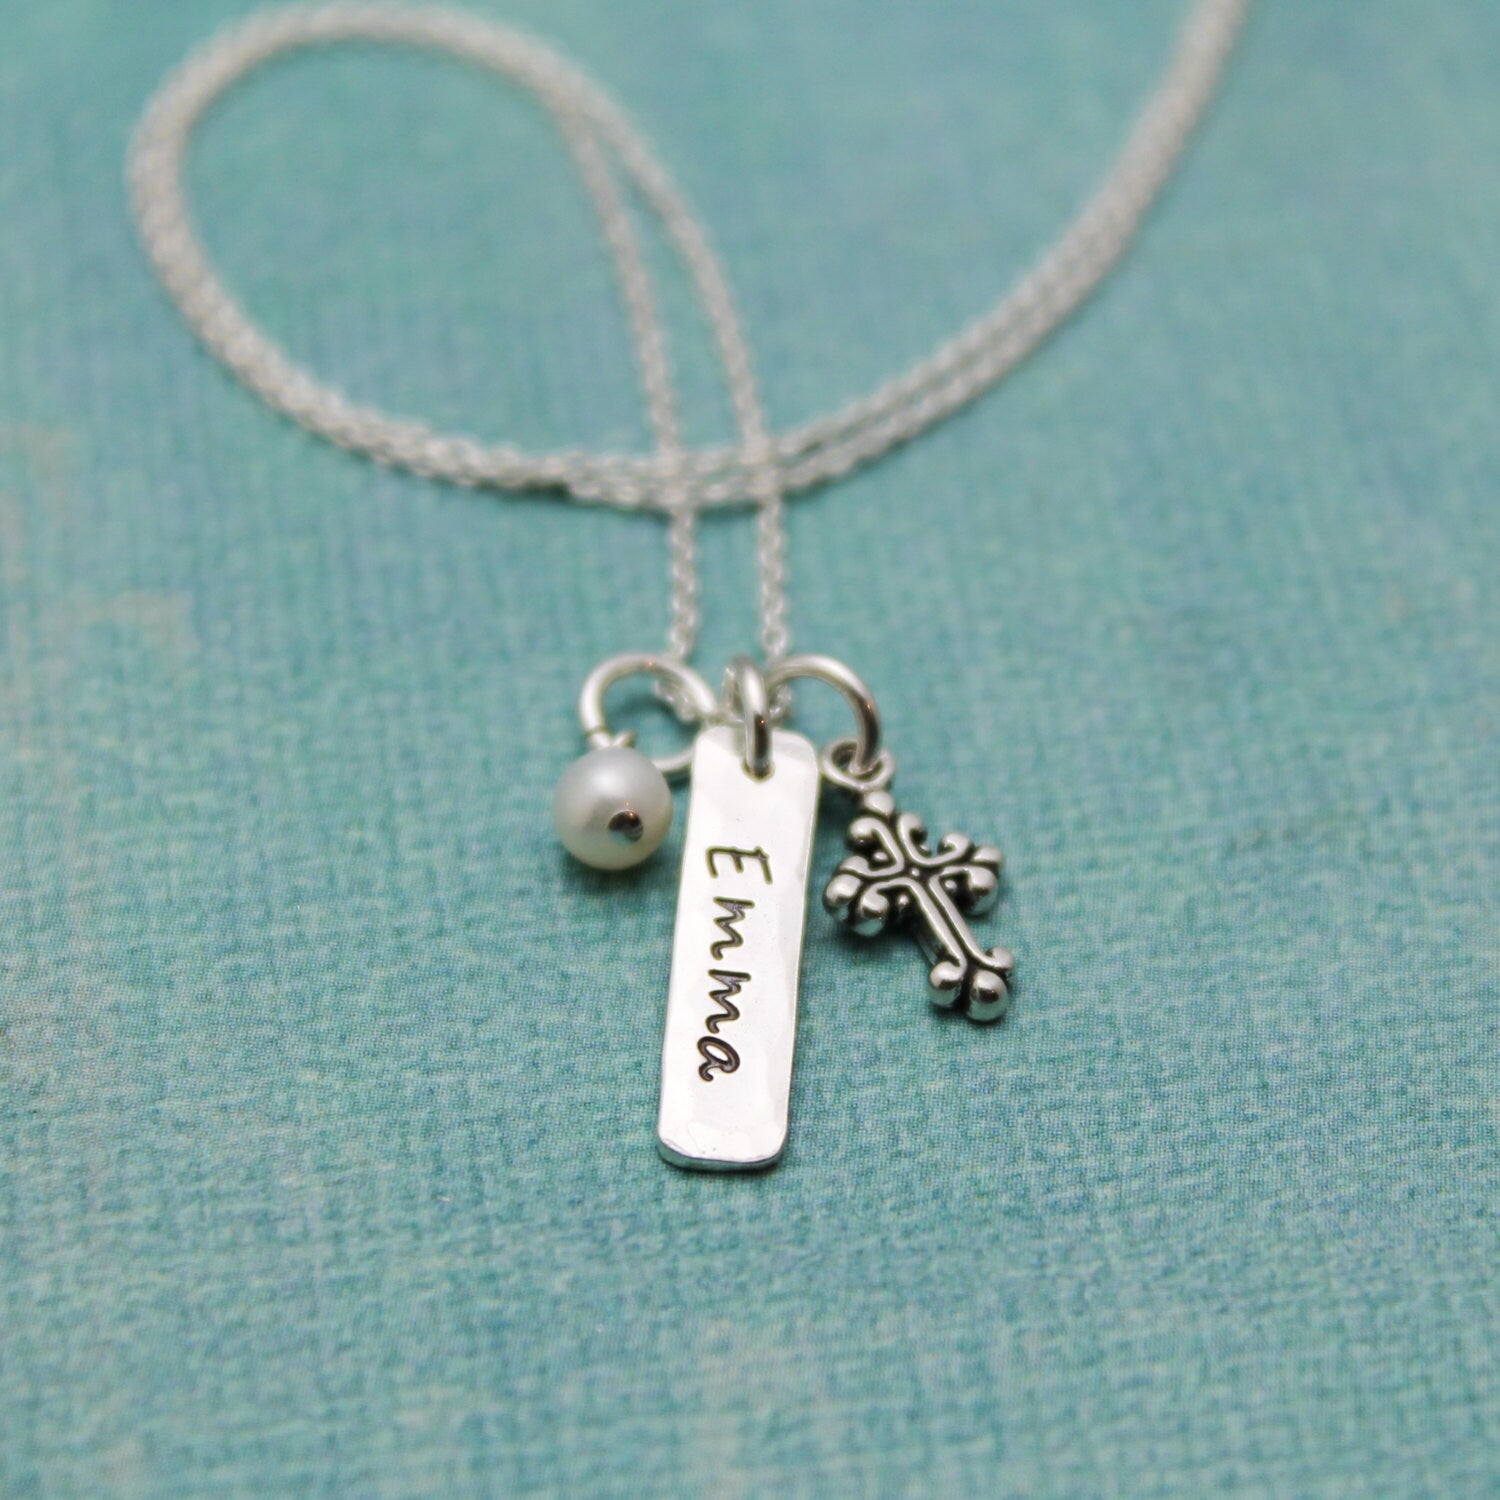 Cross Tag Necklace with Birthstone or Pearl for Confirmation Personalized Sterling Silver Hand Stamped Jewelry